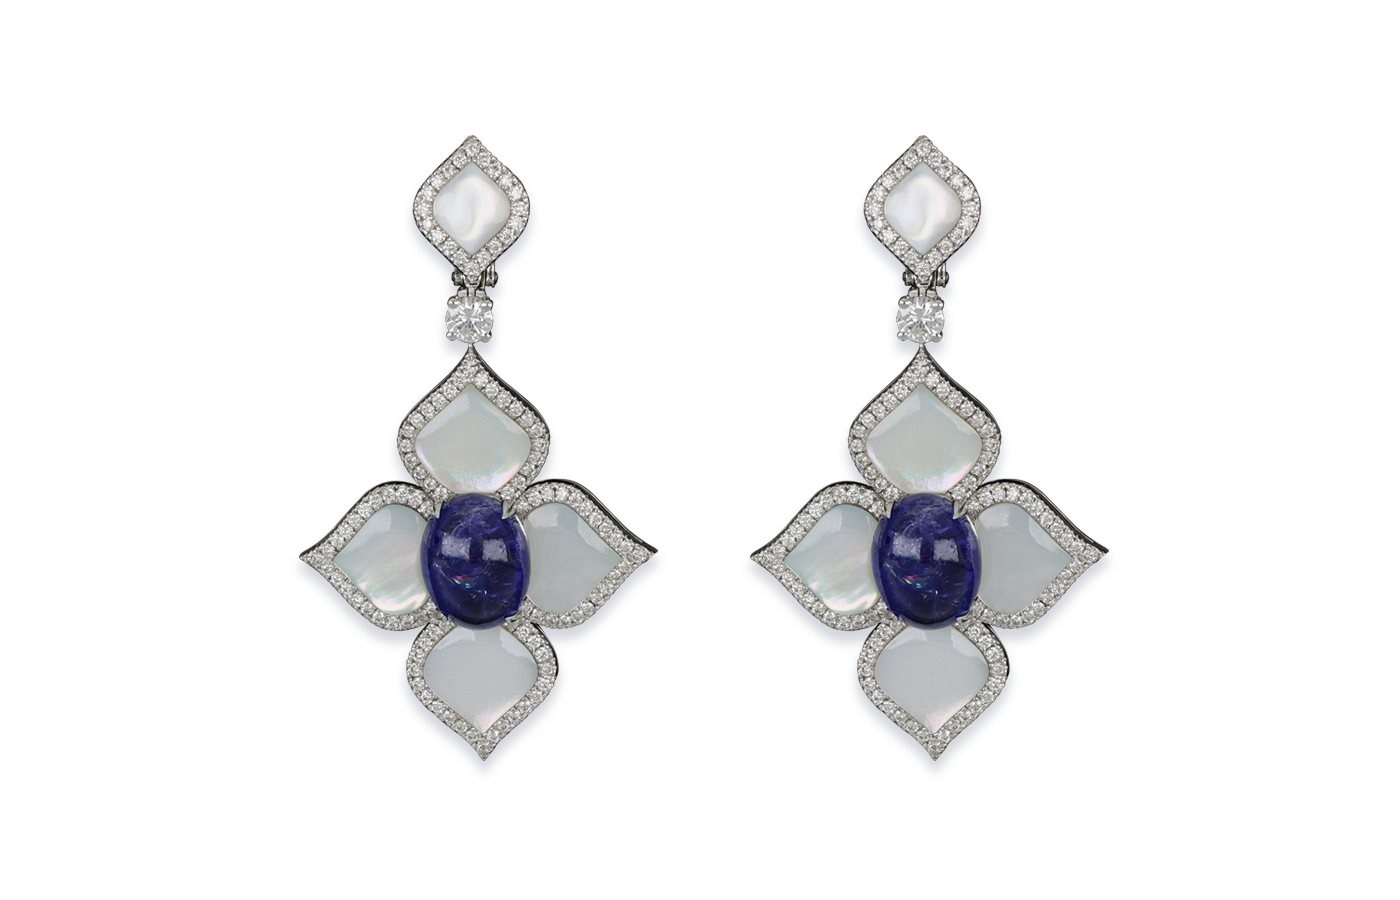 J’OR Jewels earrings from the Harem collection with tanzanite cabochons, mother of pearl and colourless diamonds in 18k white gold 